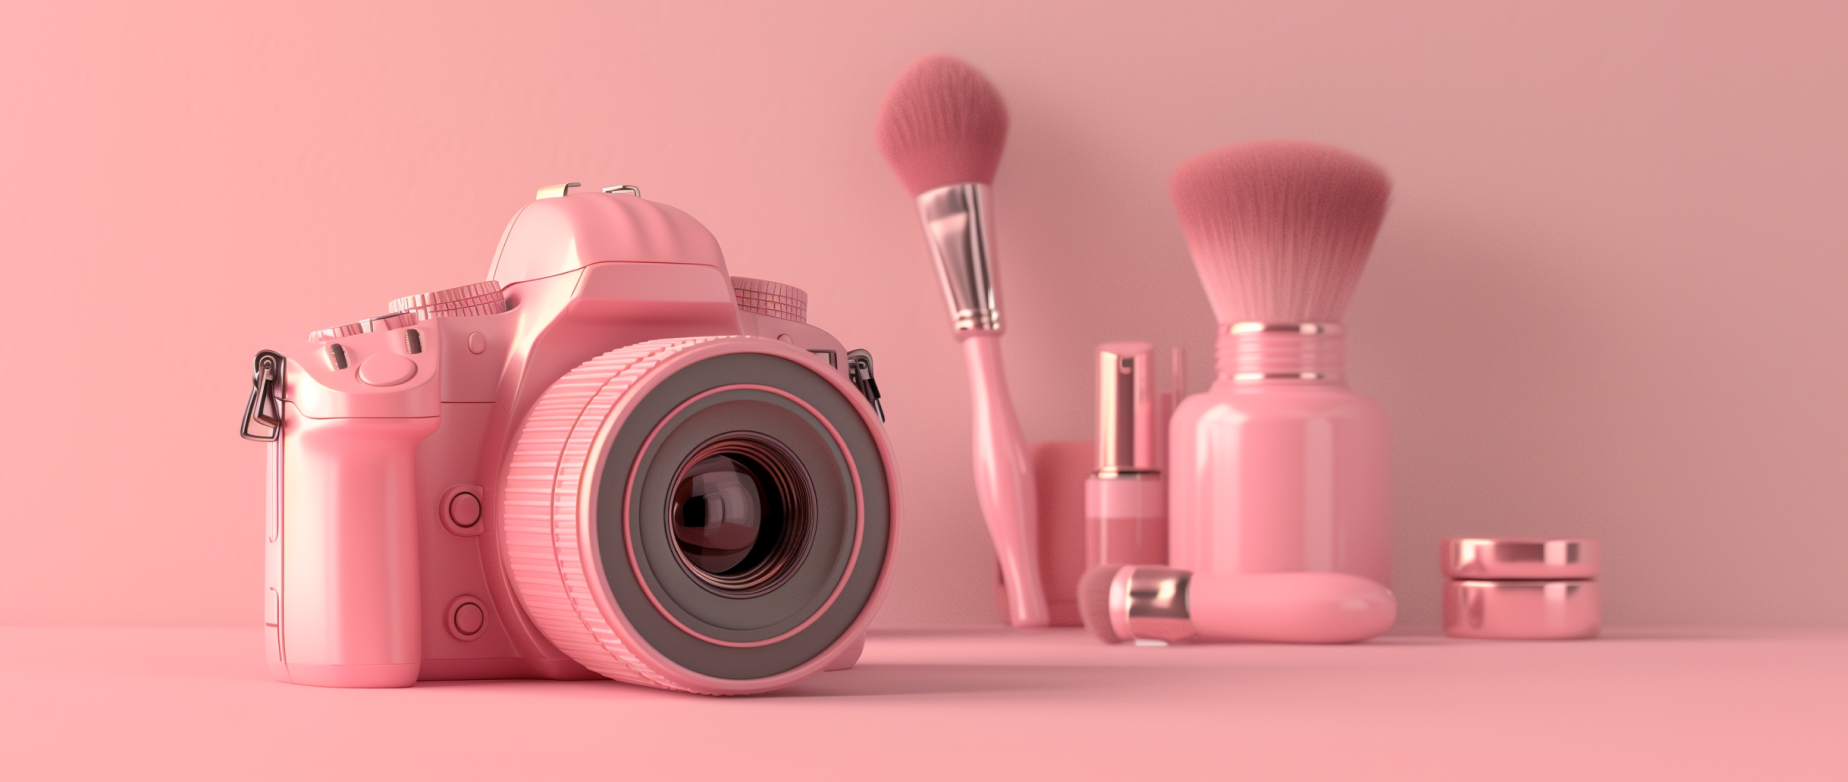 A pink camera next to cosmetics on a pink background.